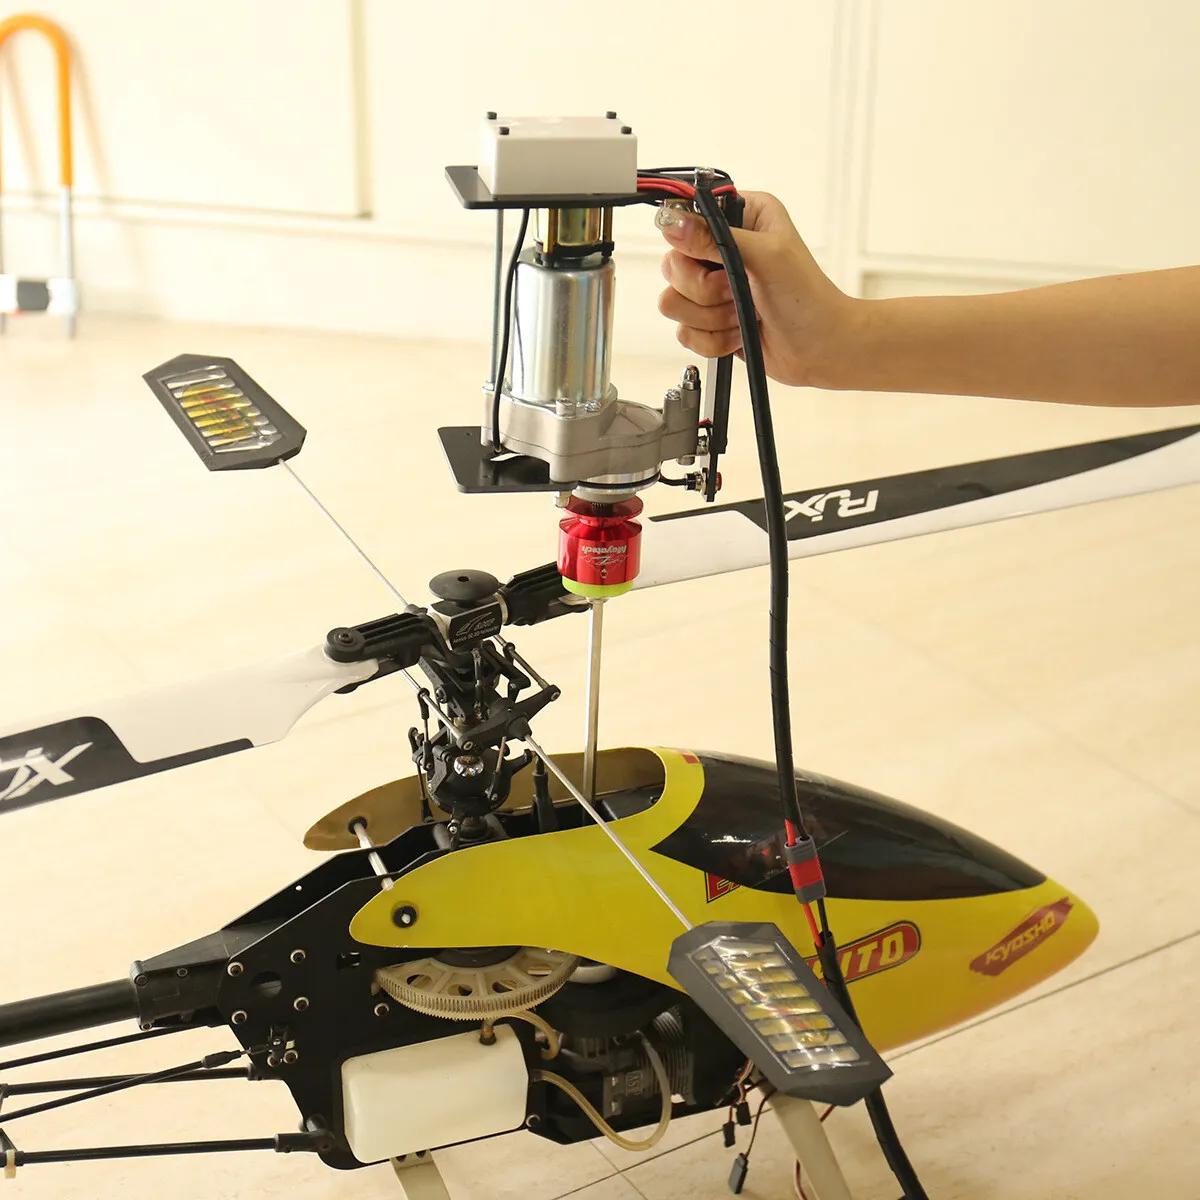 Gas Powered Remote Helicopter: Essentials of Gas-Powered Remote Helicopter Maintenance